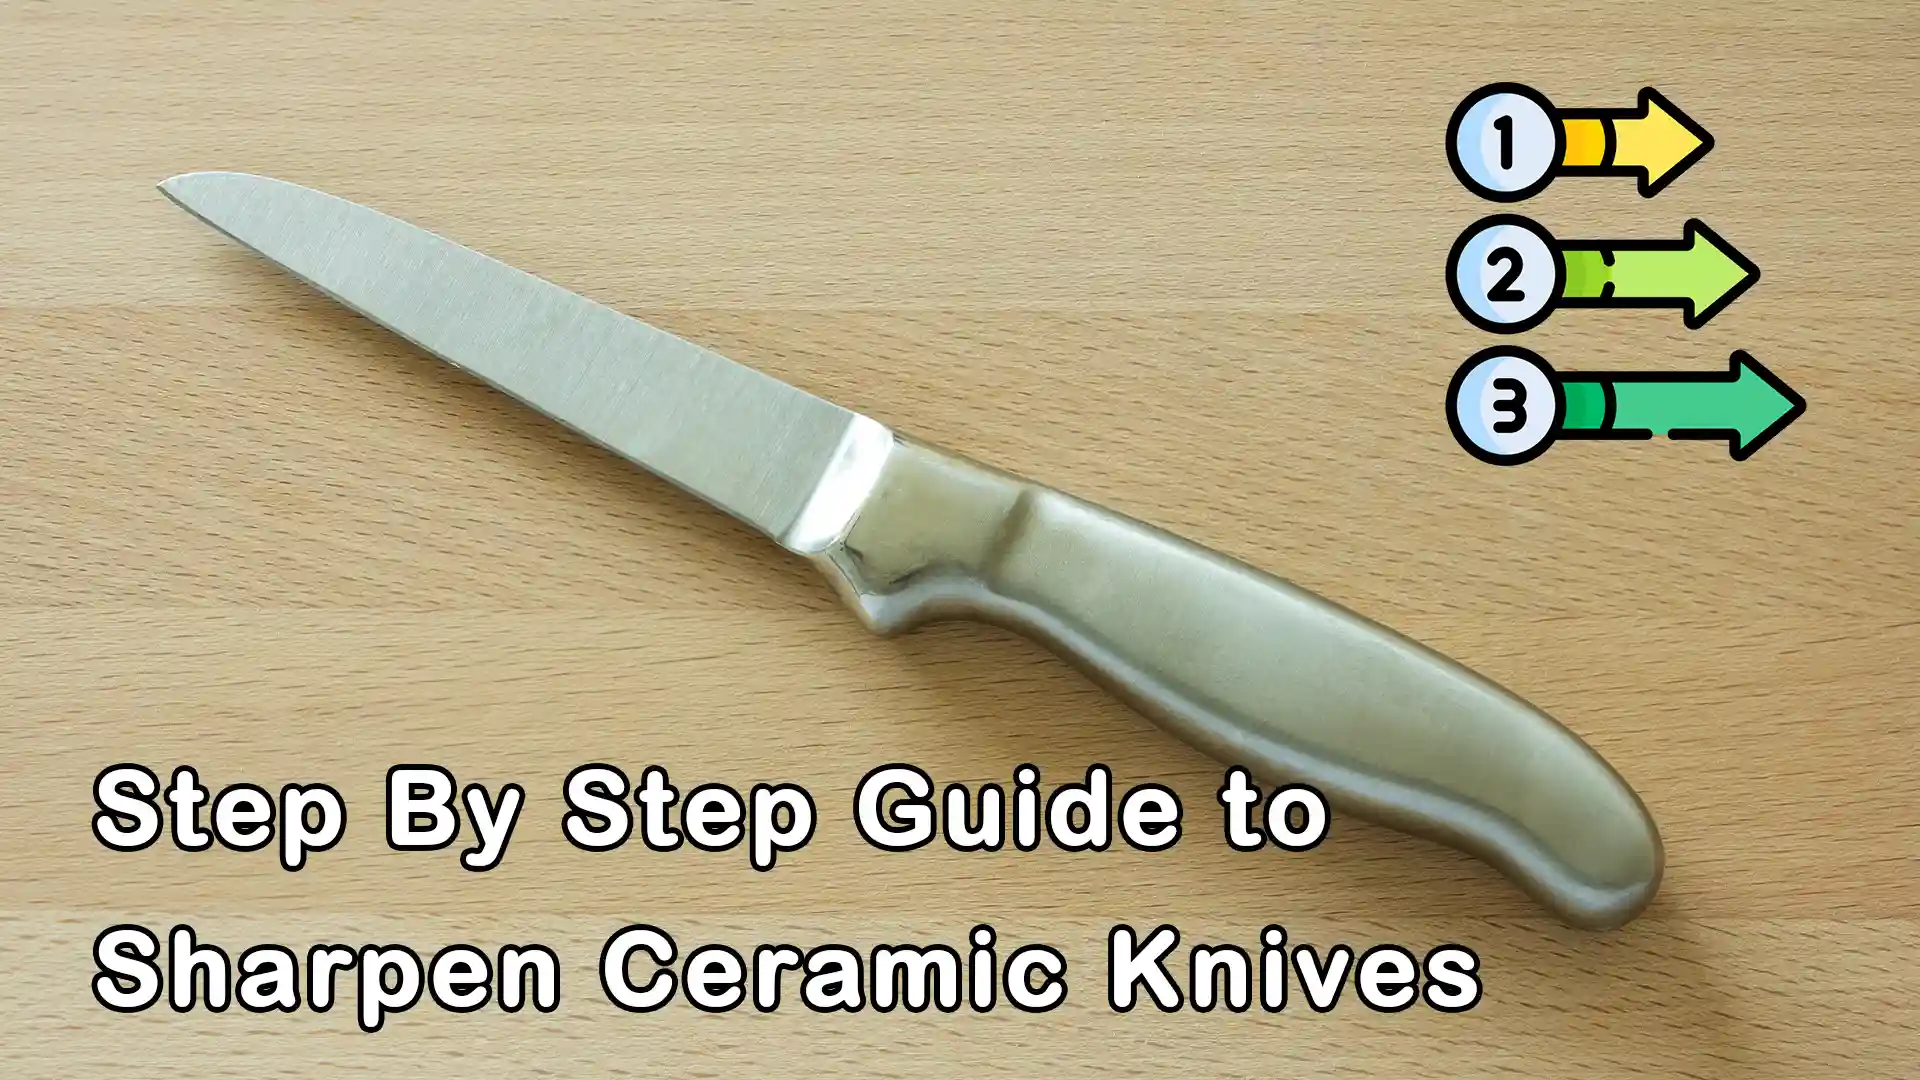 Step by Step Guide to Sharpen Ceramic Knives